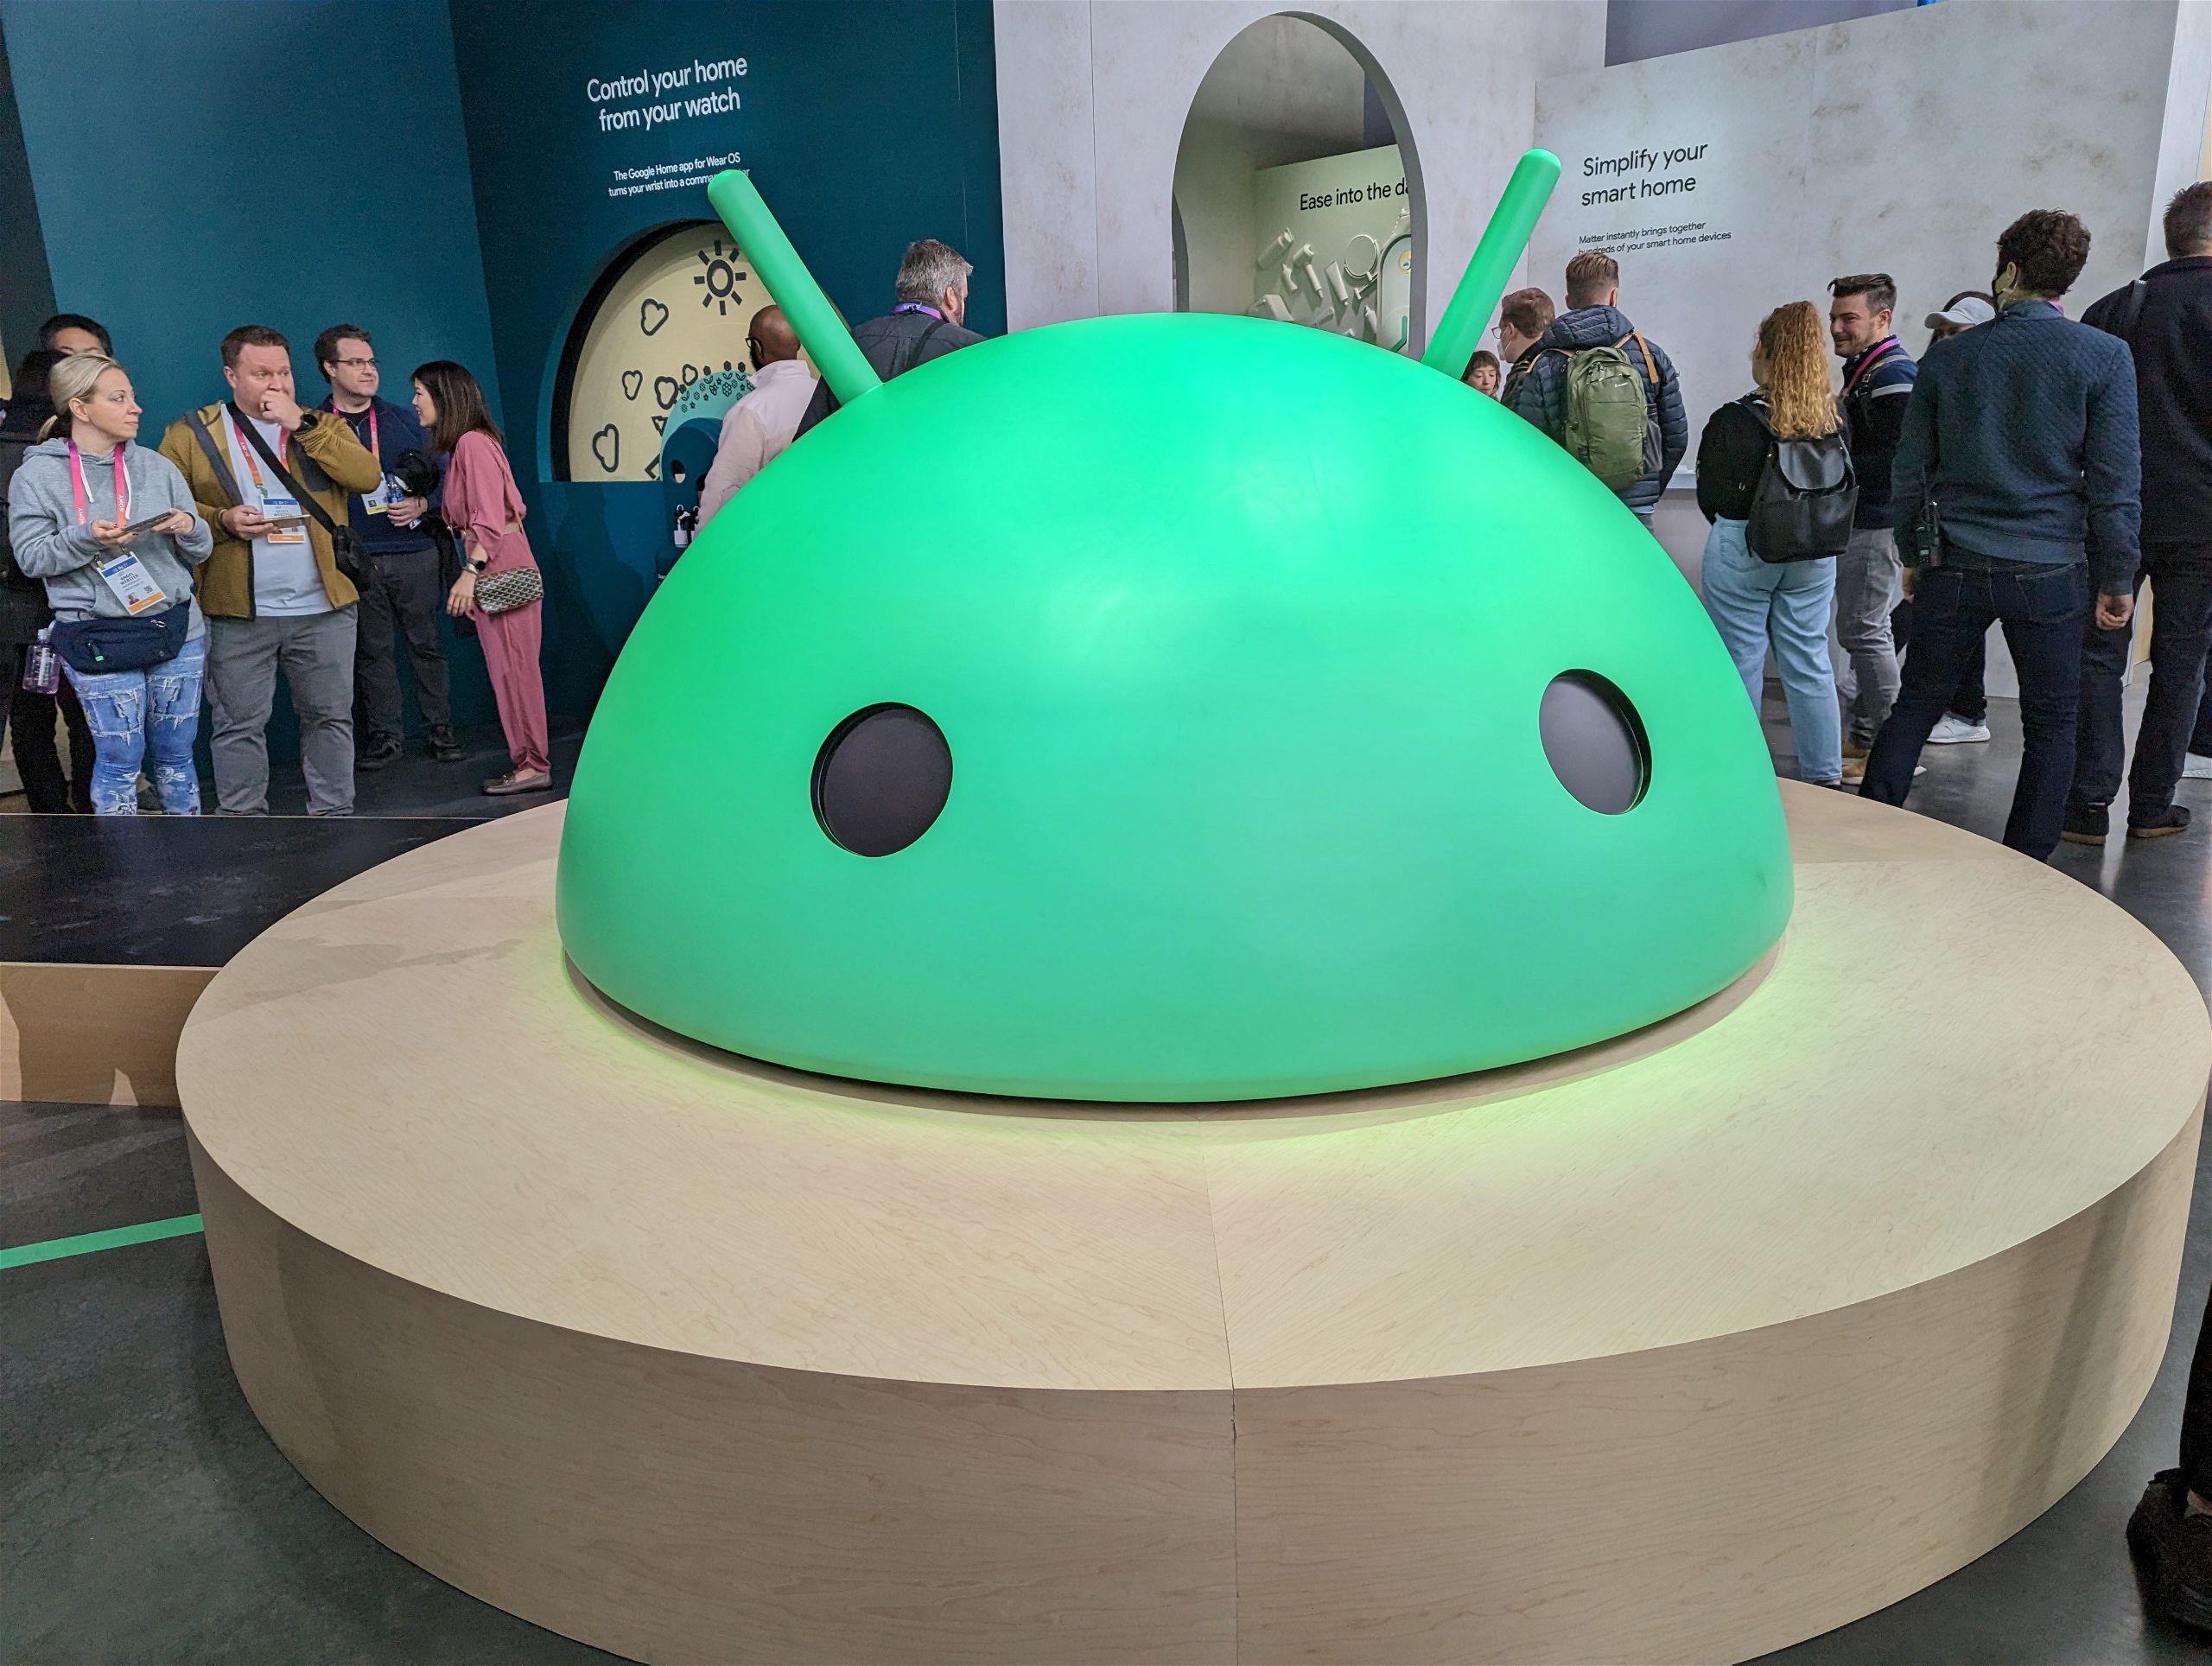 A green Android head